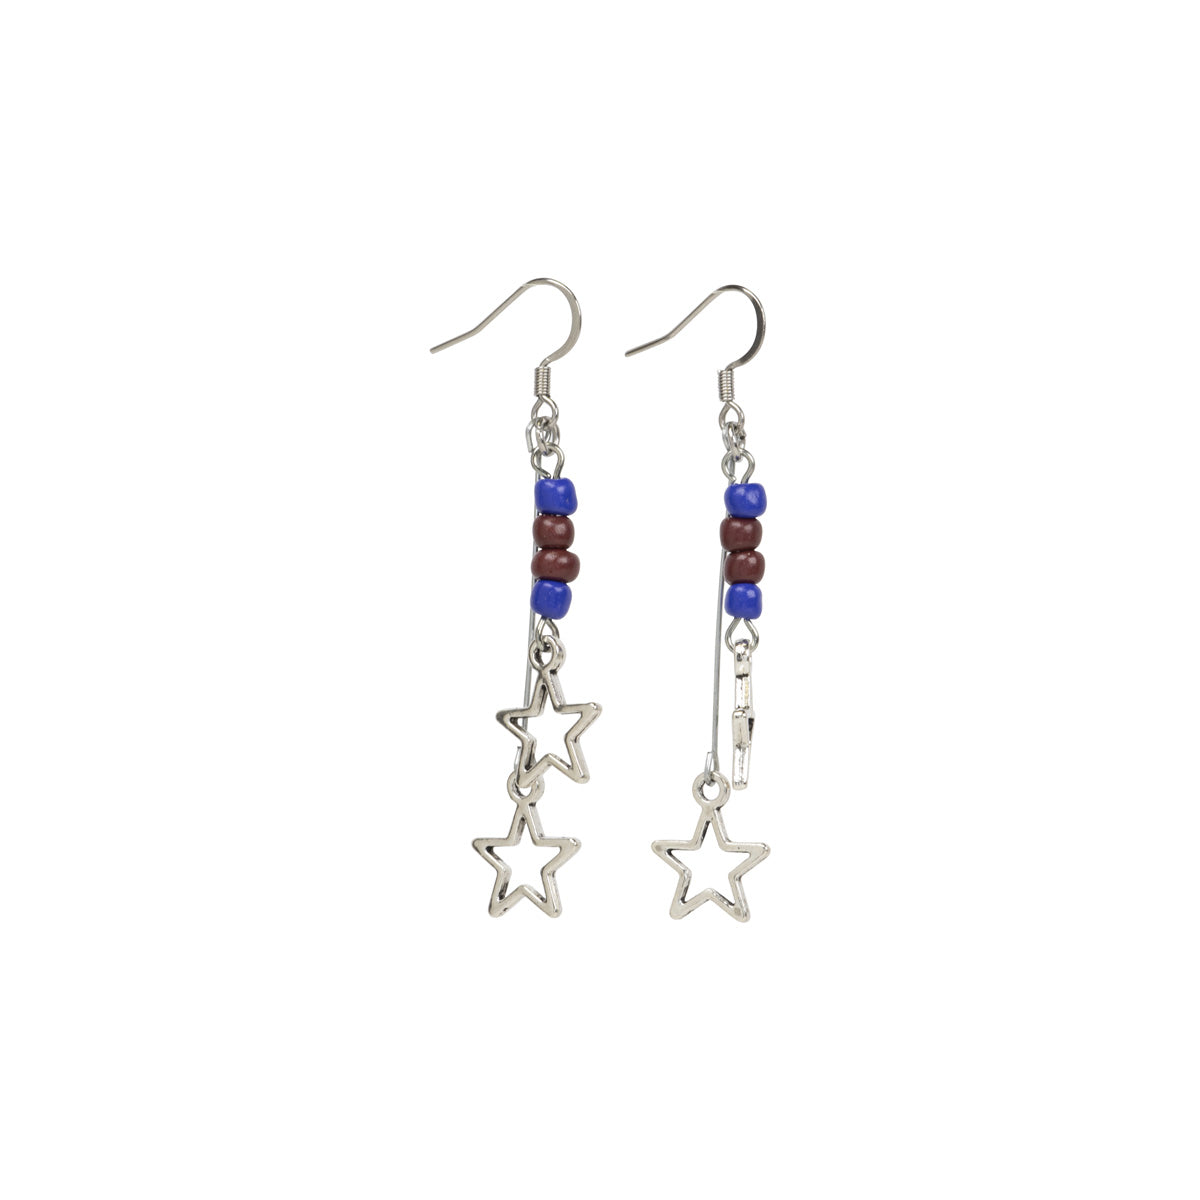 Star earrings with beads